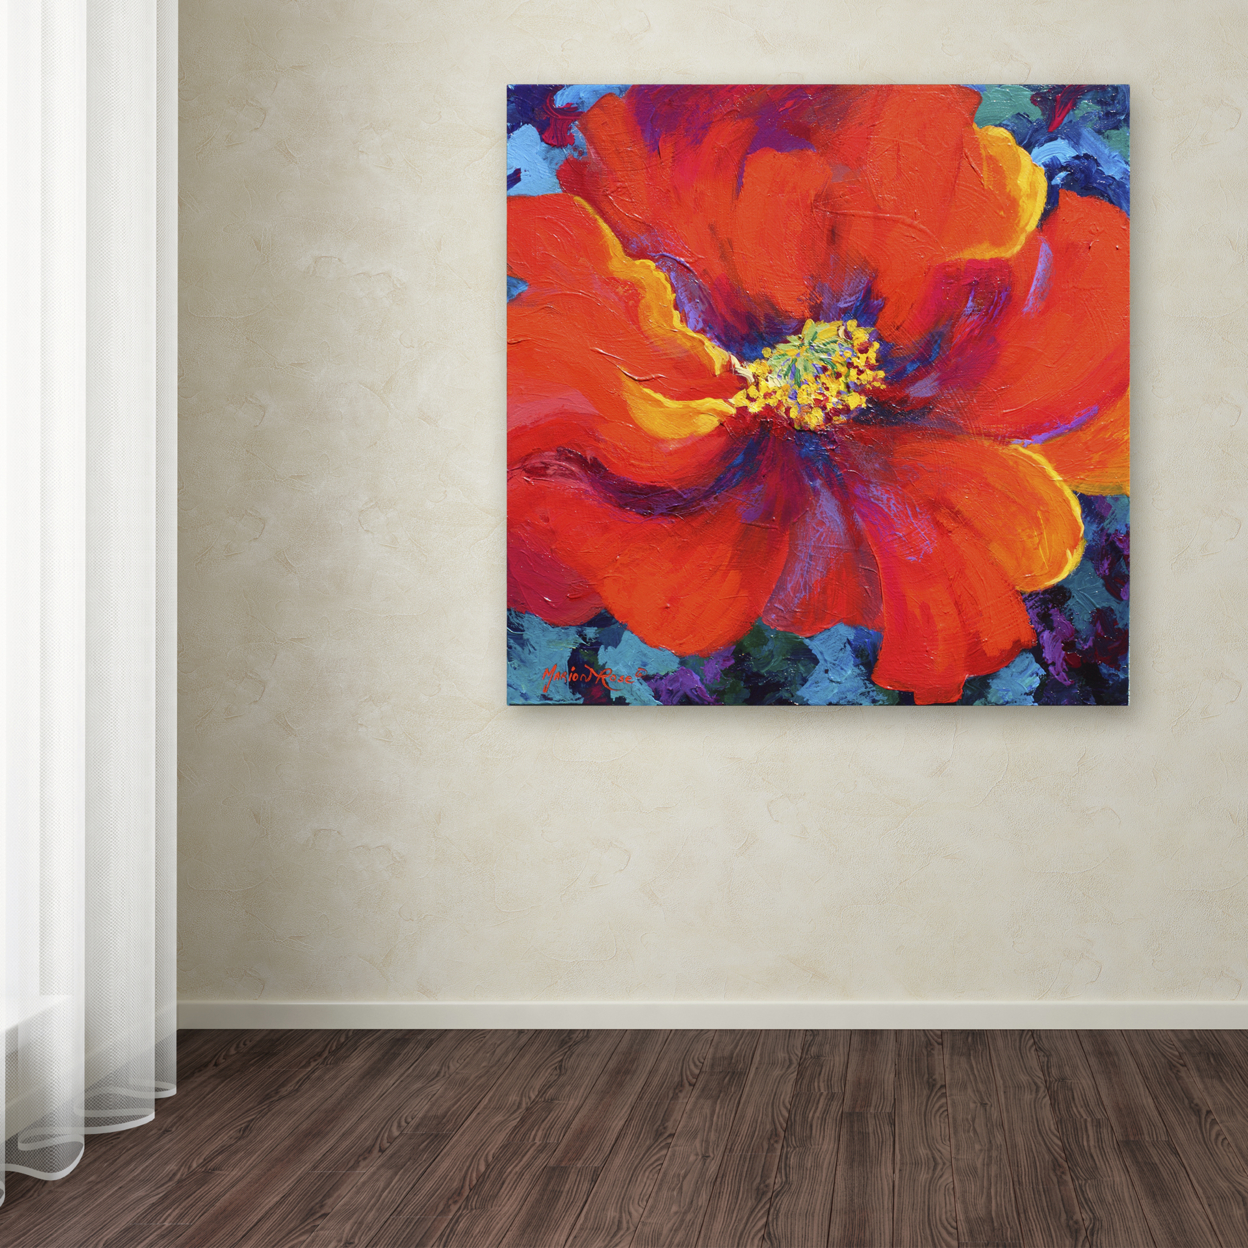 Marion Rose 'Passion Poppy' Ready To Hang Canvas Art 24 X 24 Inches Made In USA